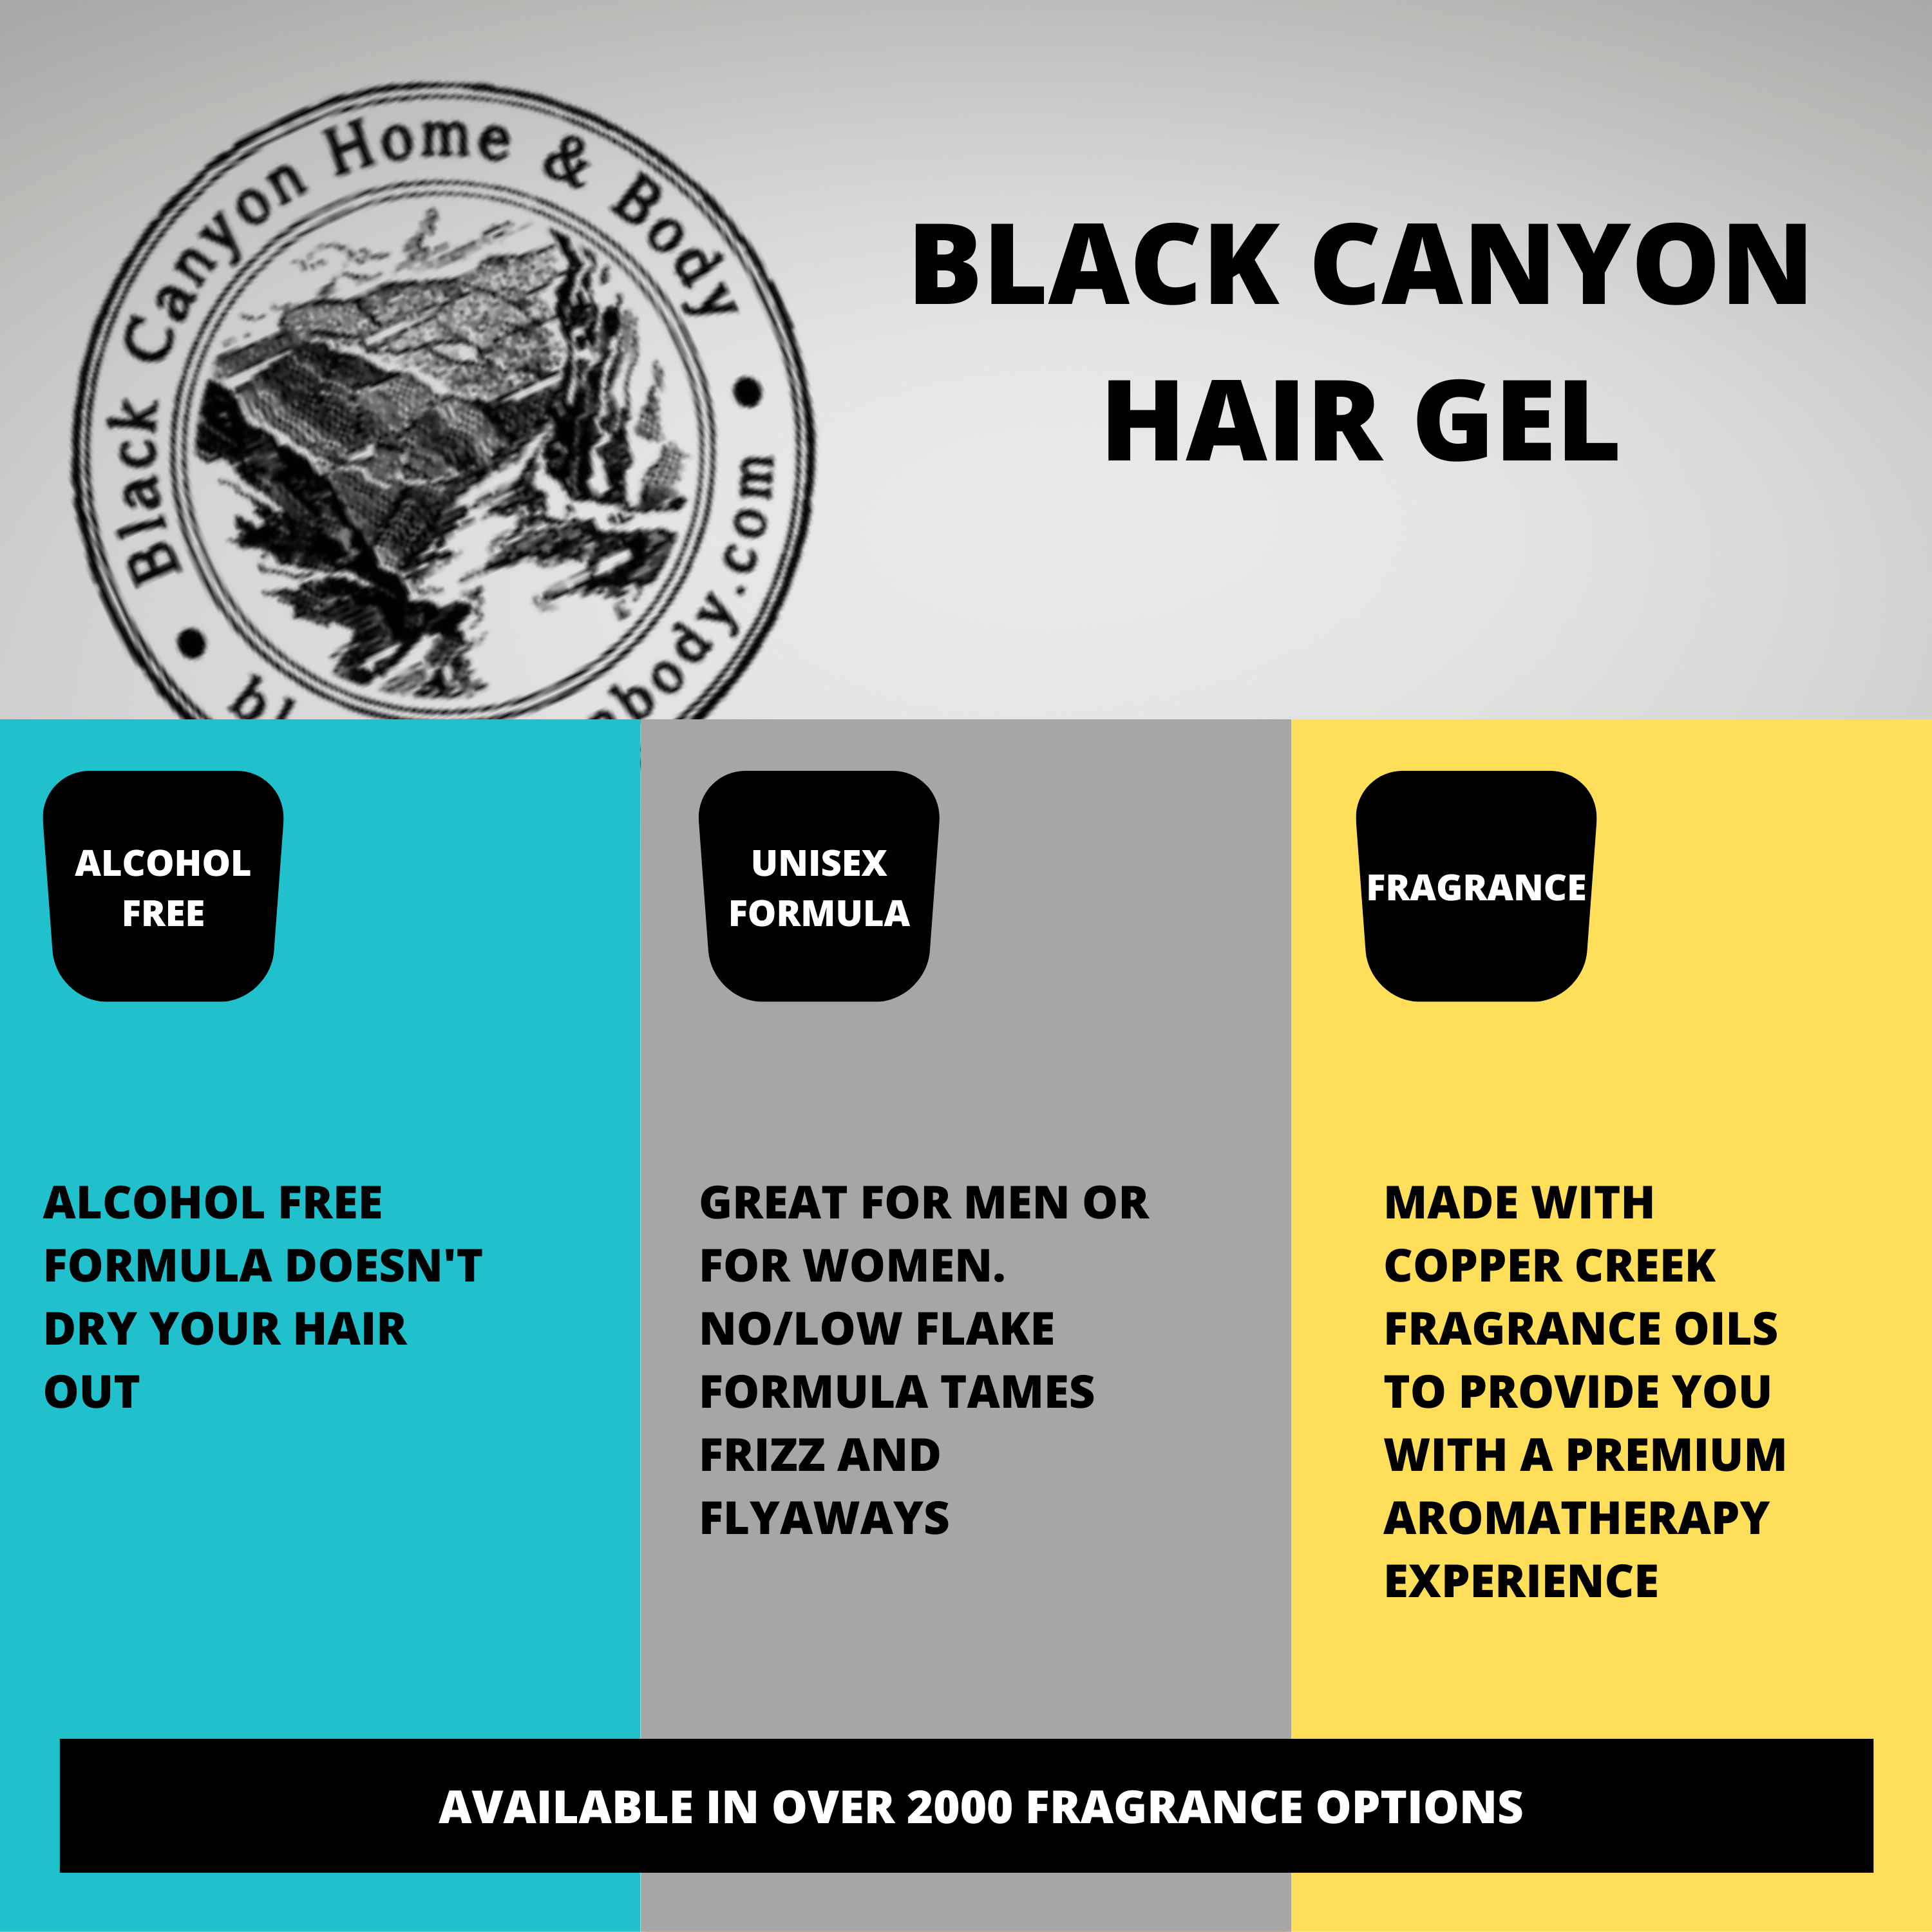 Black Canyon Cucumber & Cantaloupe Scented Hair Gel